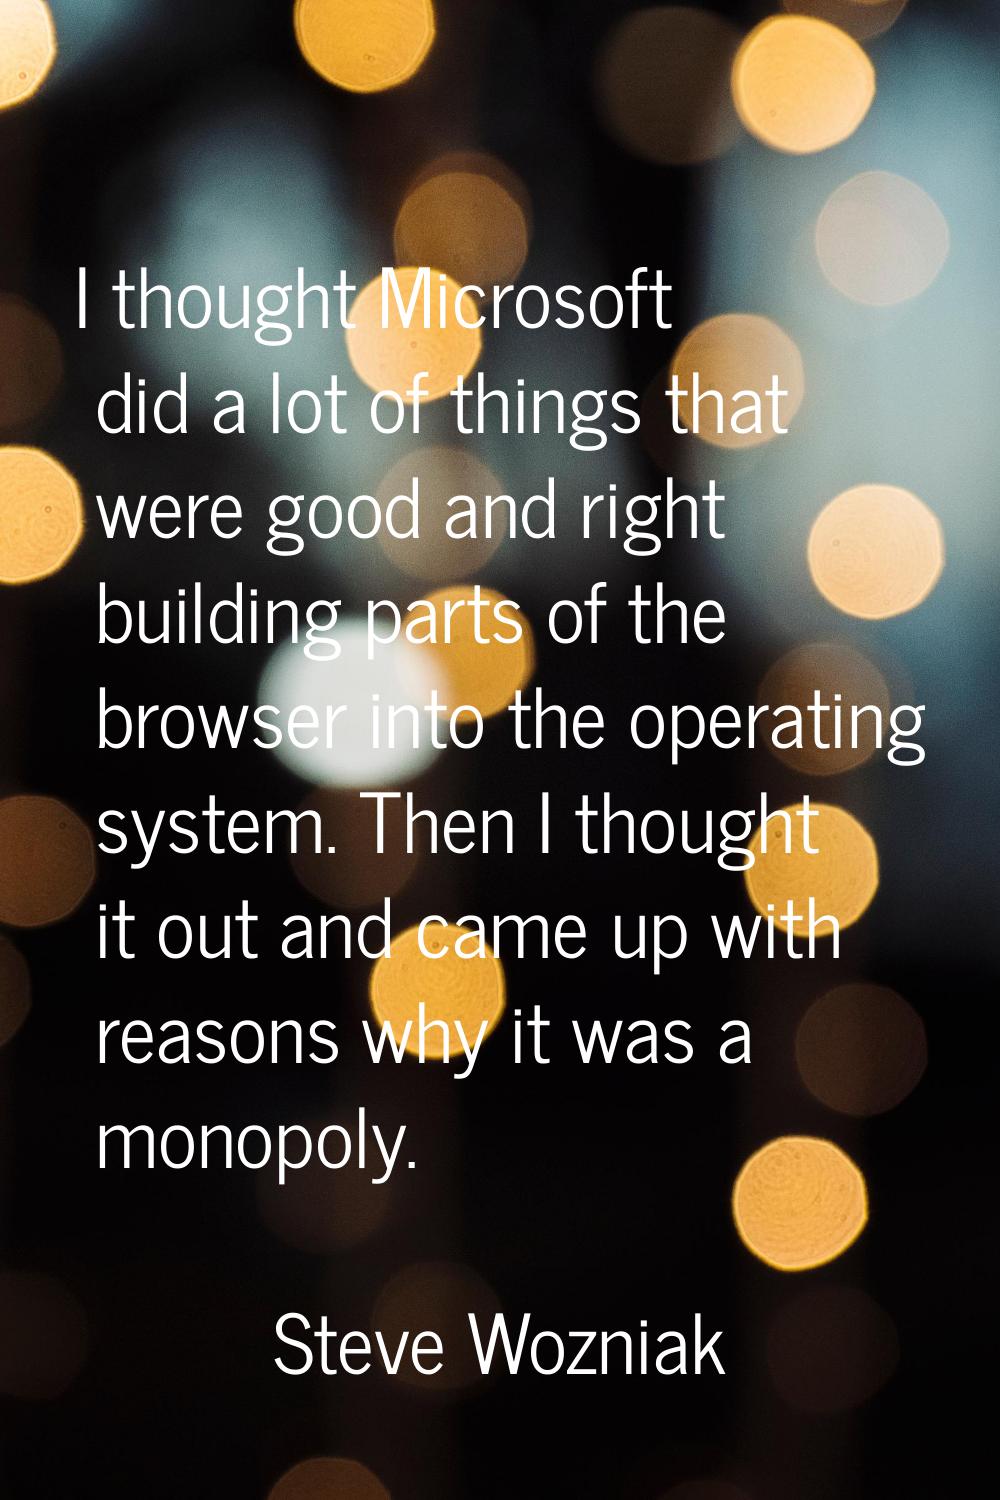 I thought Microsoft did a lot of things that were good and right building parts of the browser into